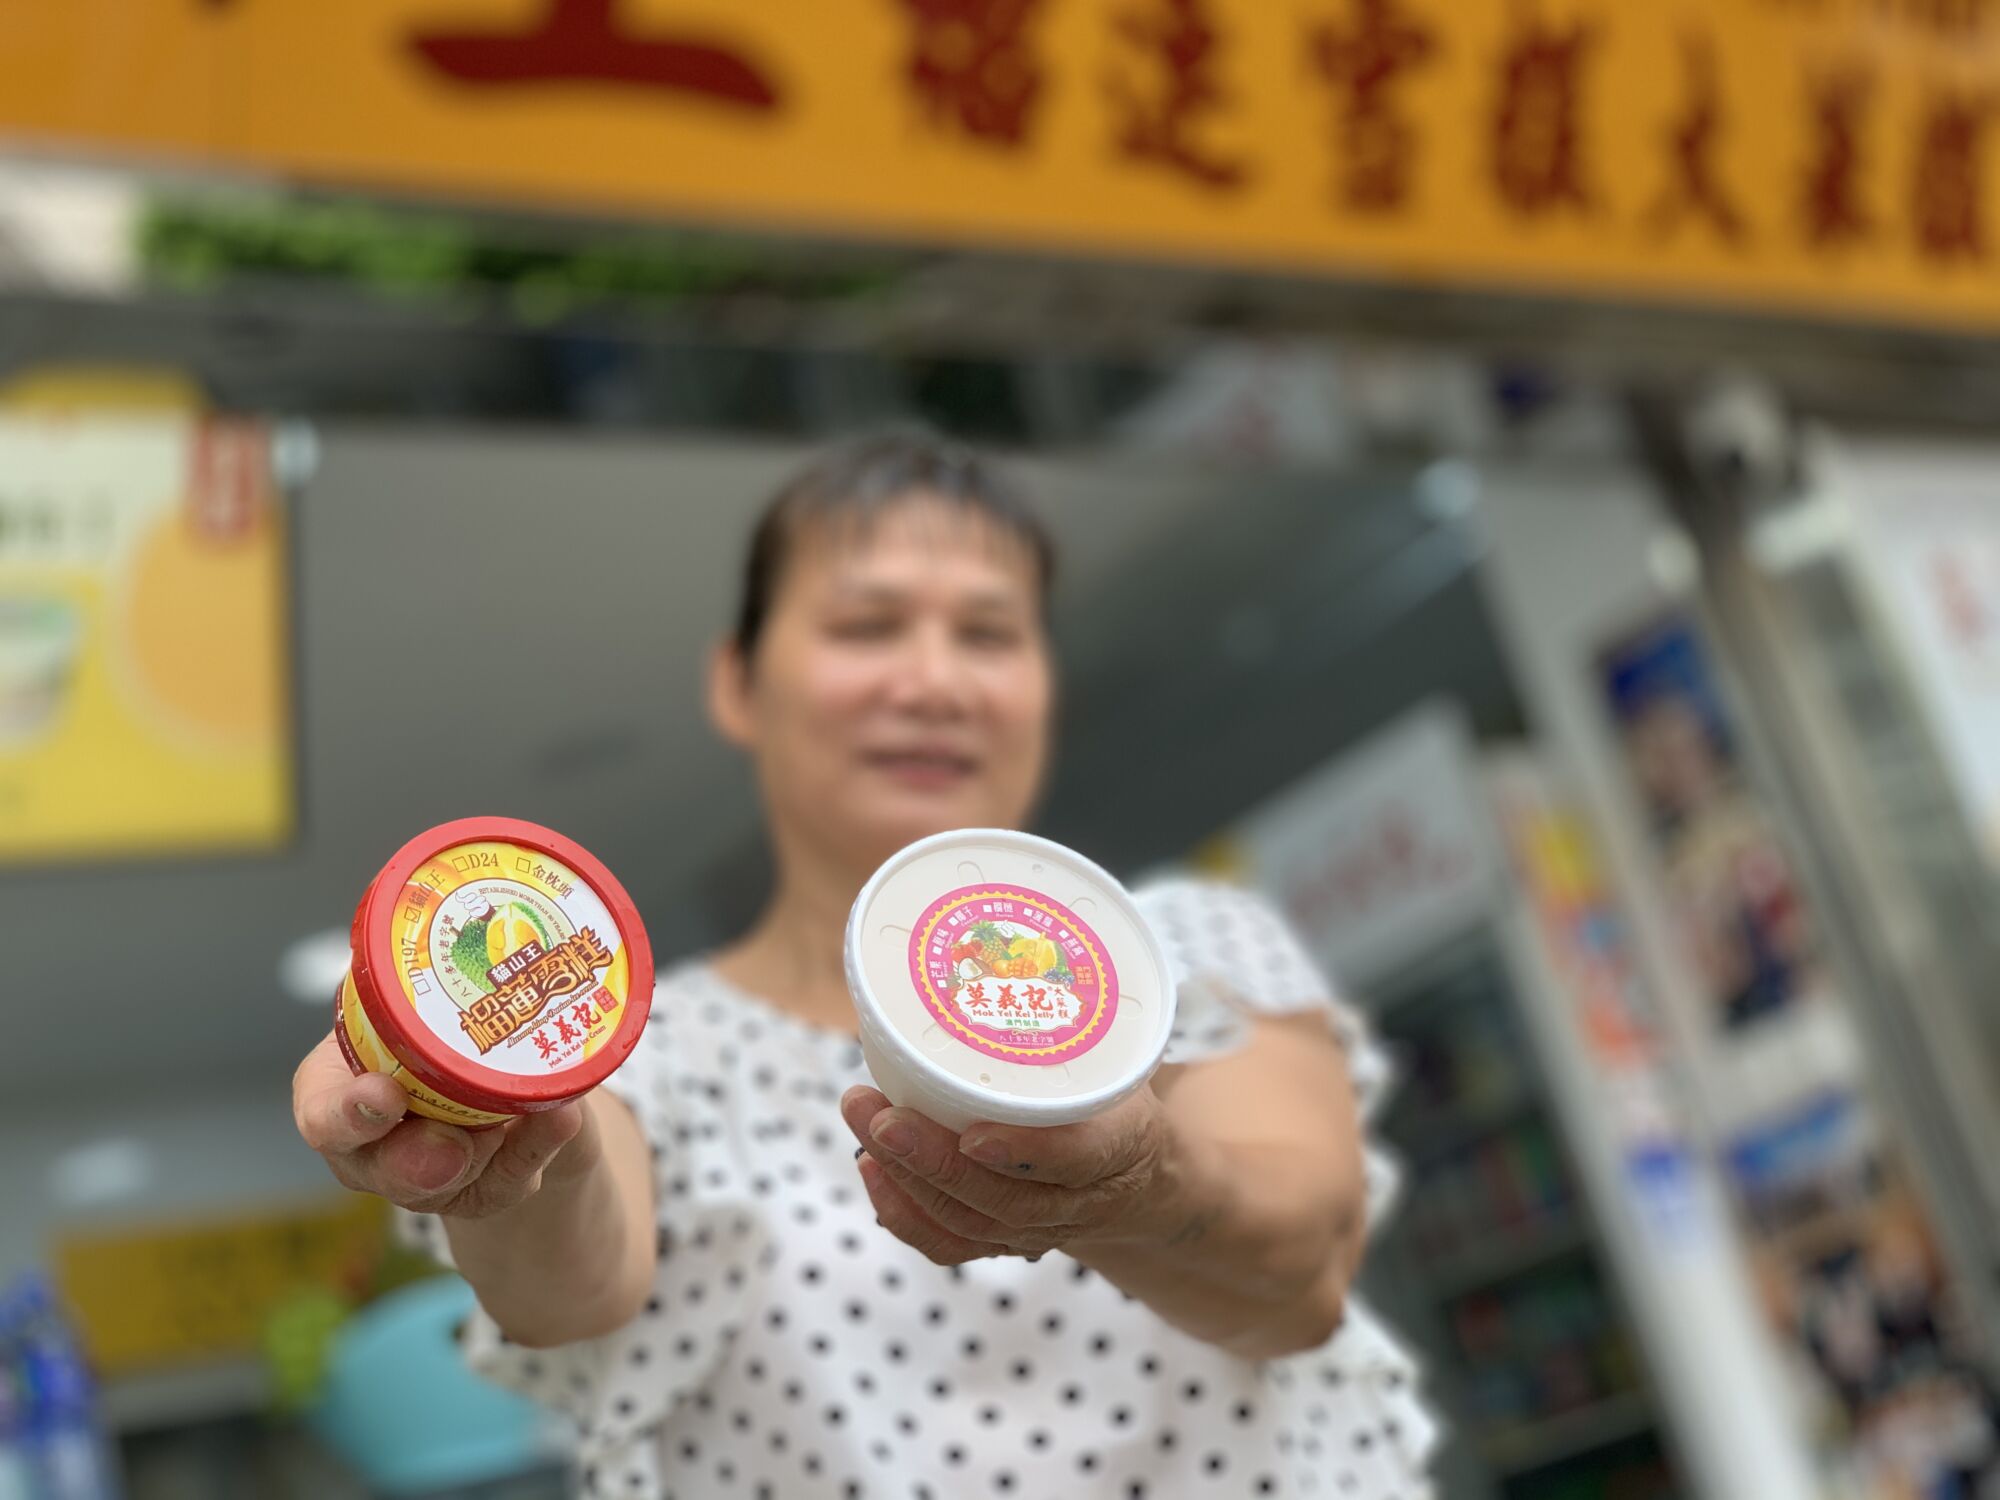 Gelatina Musang Mok Yei Kei Owner Liang Smiling with Ice Cream in Hand Blurred Face Macau Lifestyle